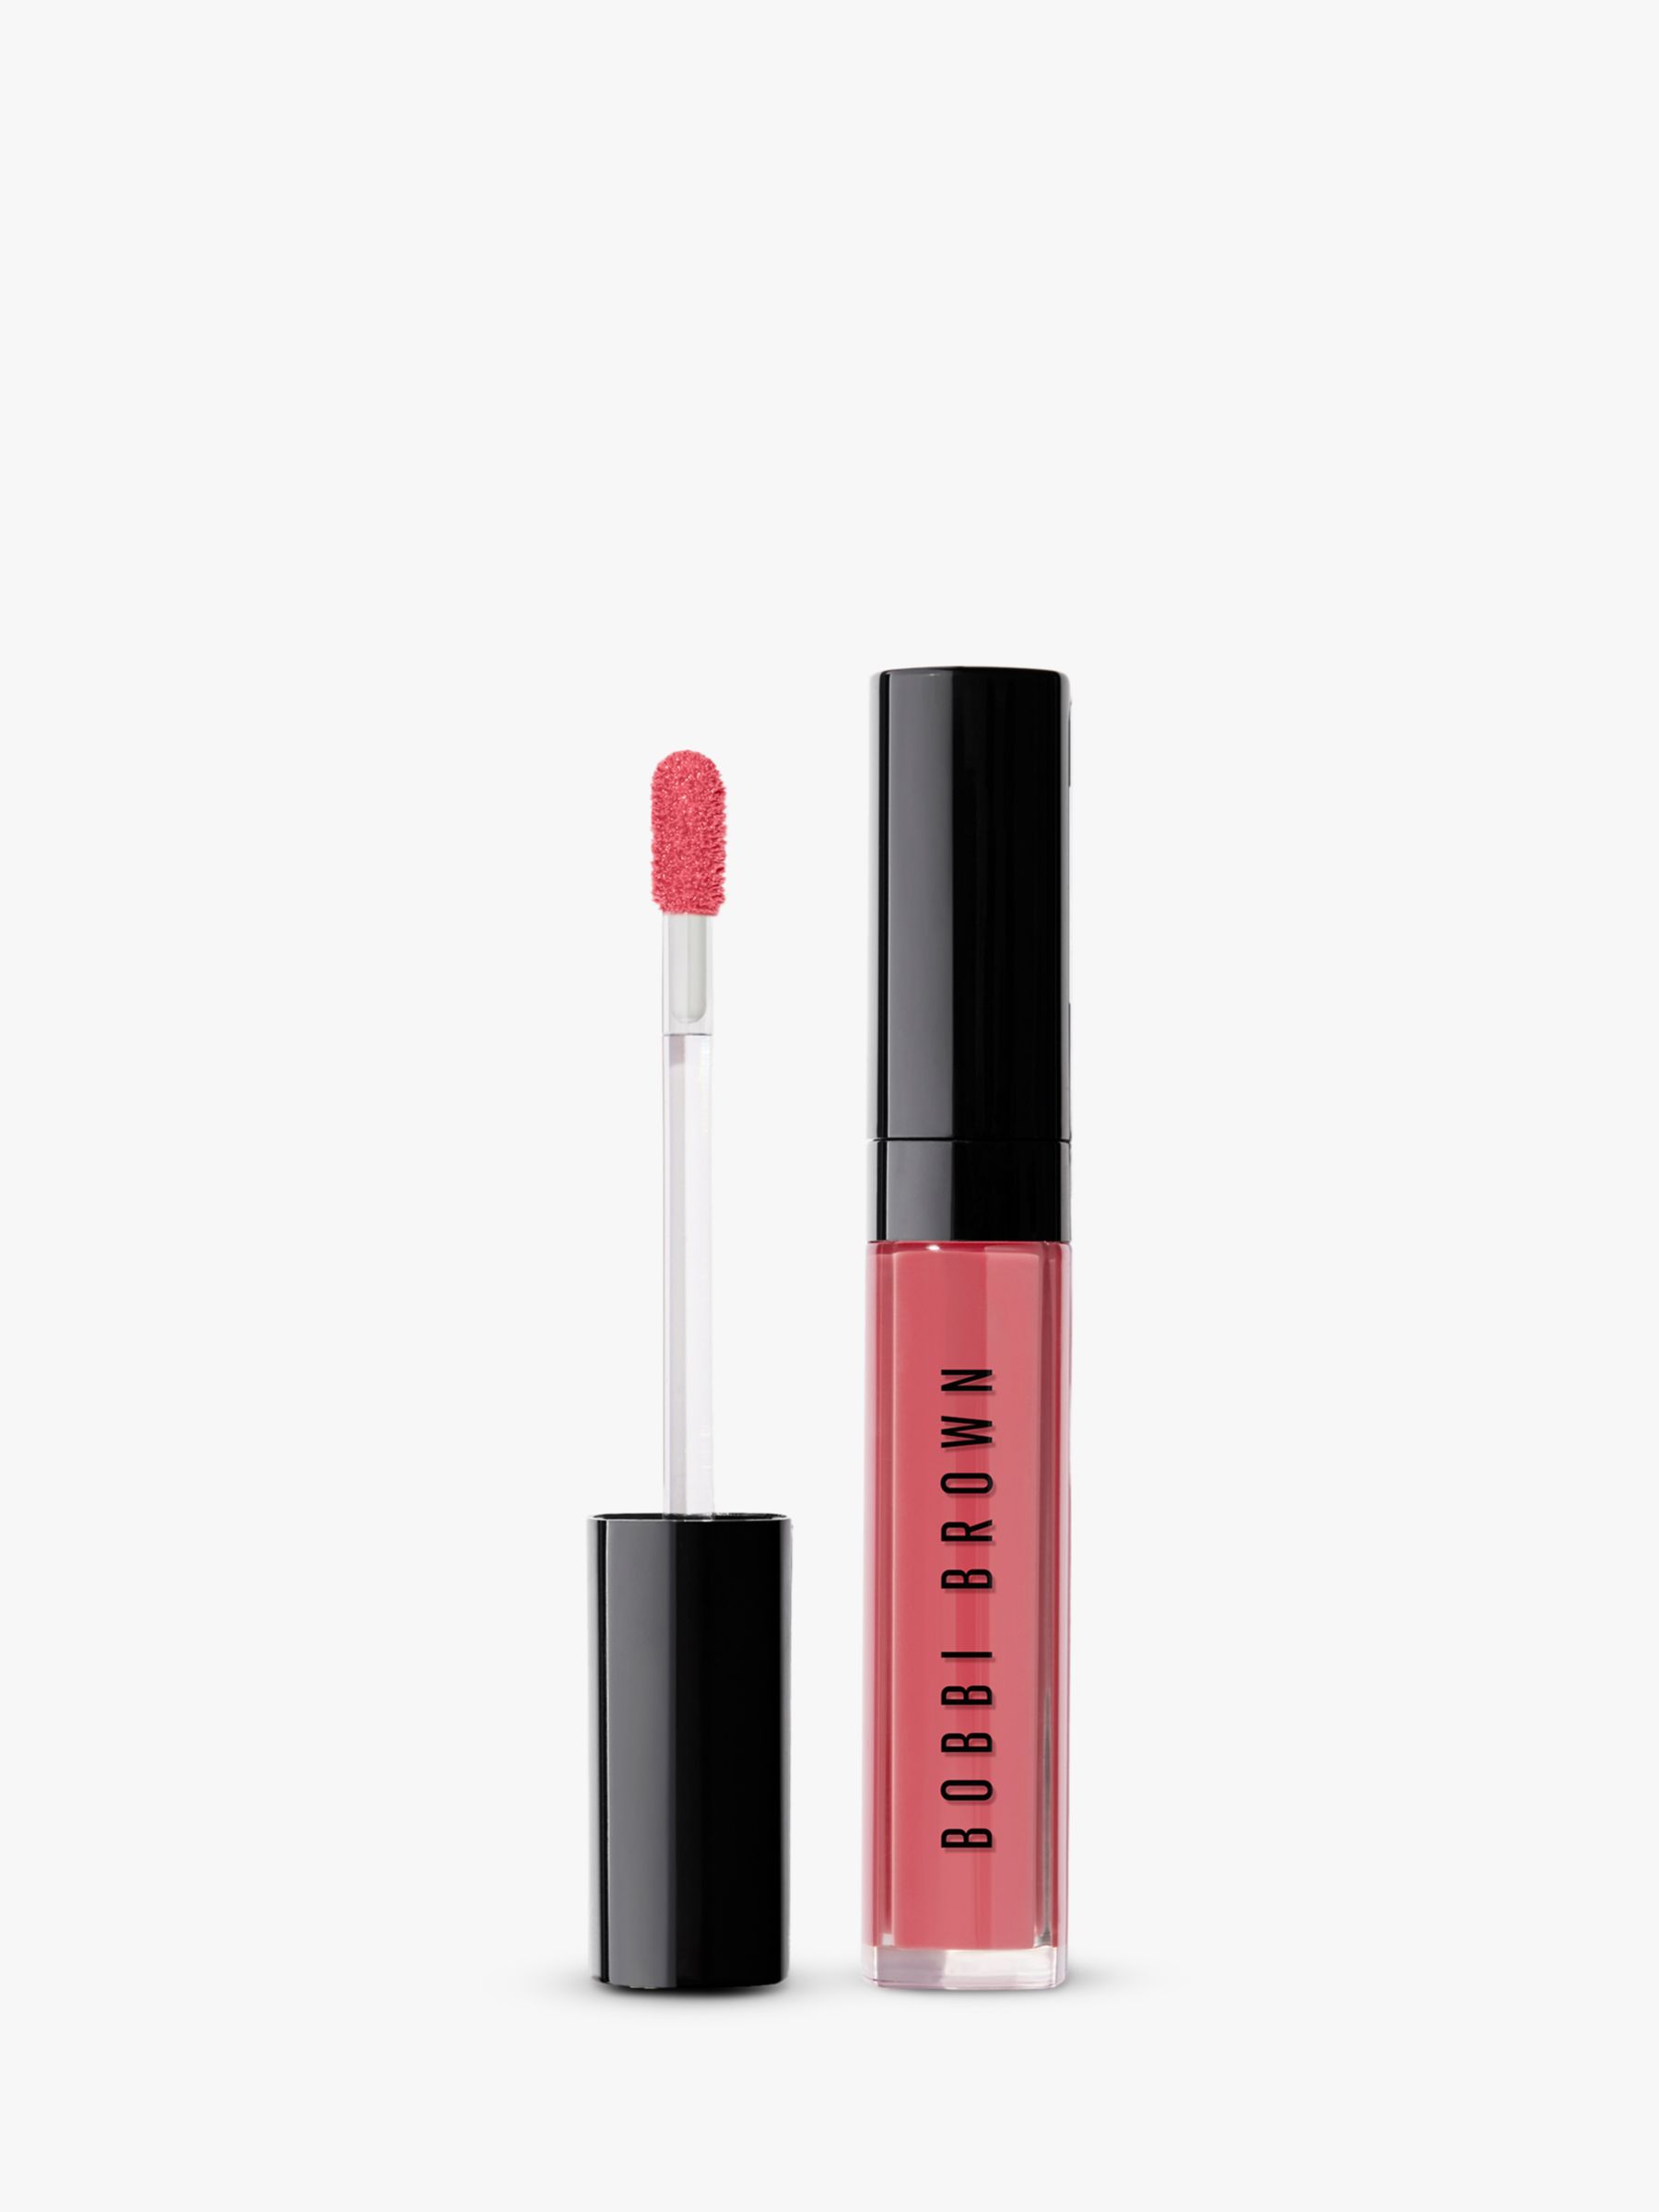 Bobbi Brown Crushed Oil-Infused Lipgloss, Love Letter 1